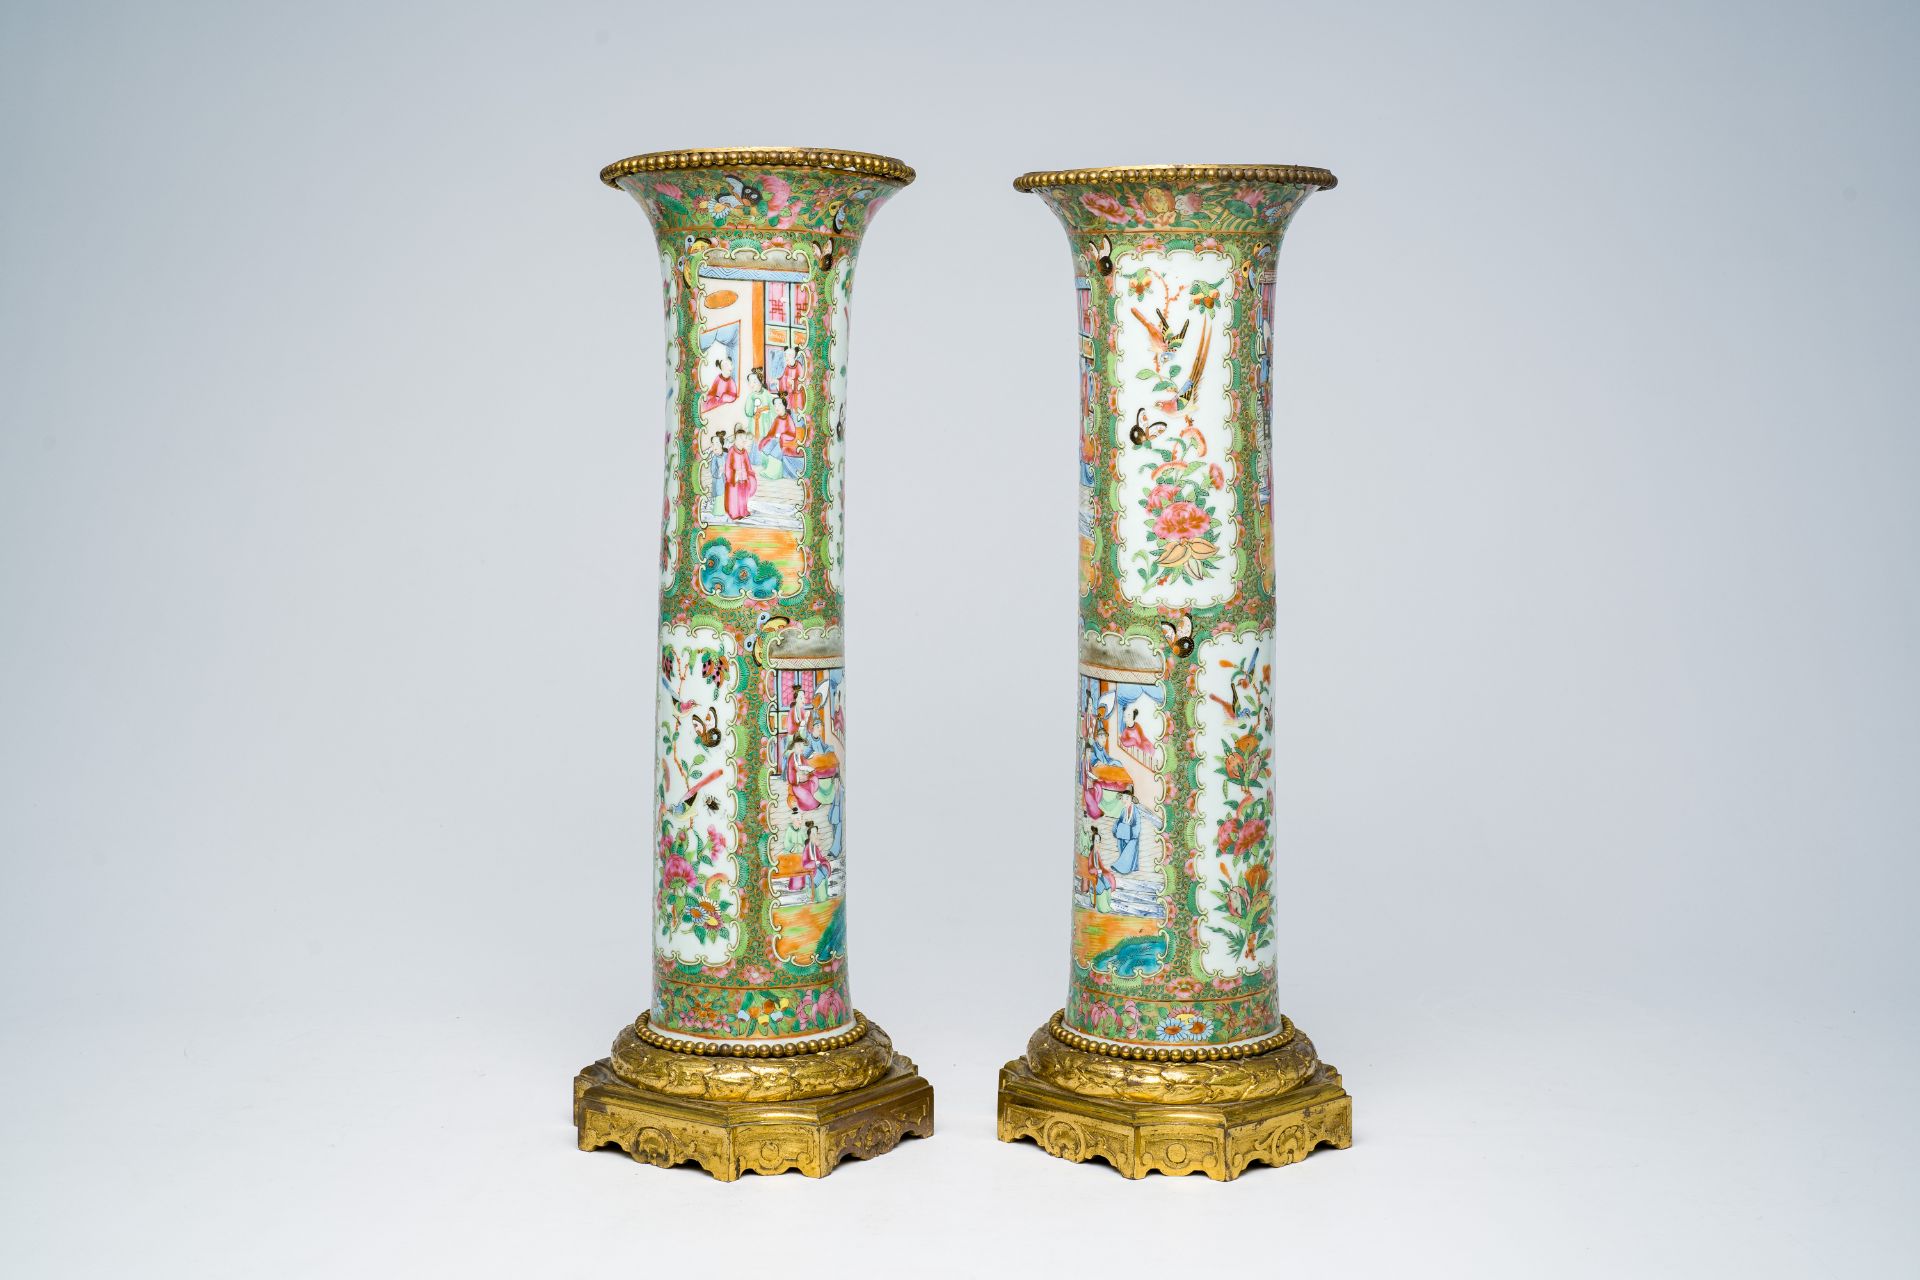 A pair of Chinese Canton famille rose gilt bronze mounted sleeve vases with palace scenes, 19th C.